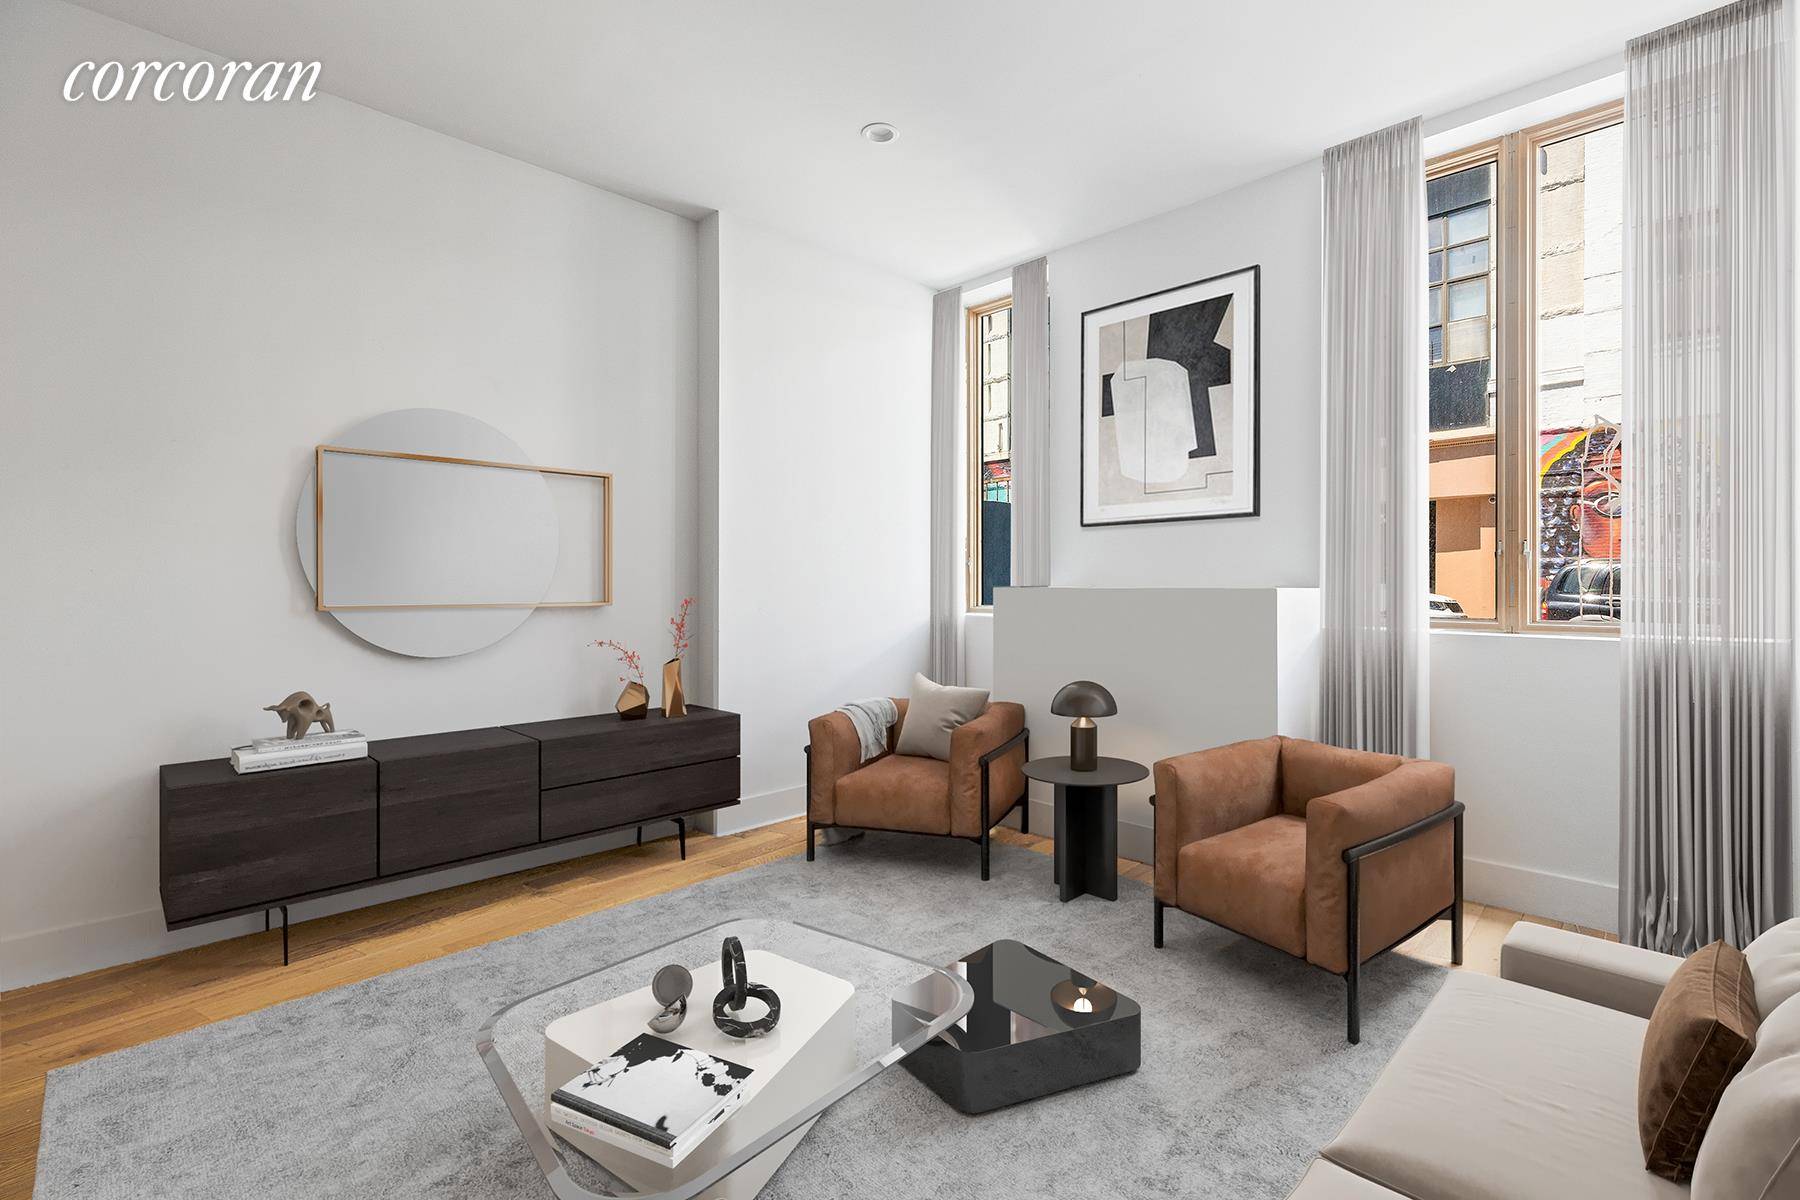 Welcome to 12 Lawton Street, a newly built seven unit condominium in the heart of Bushwick.